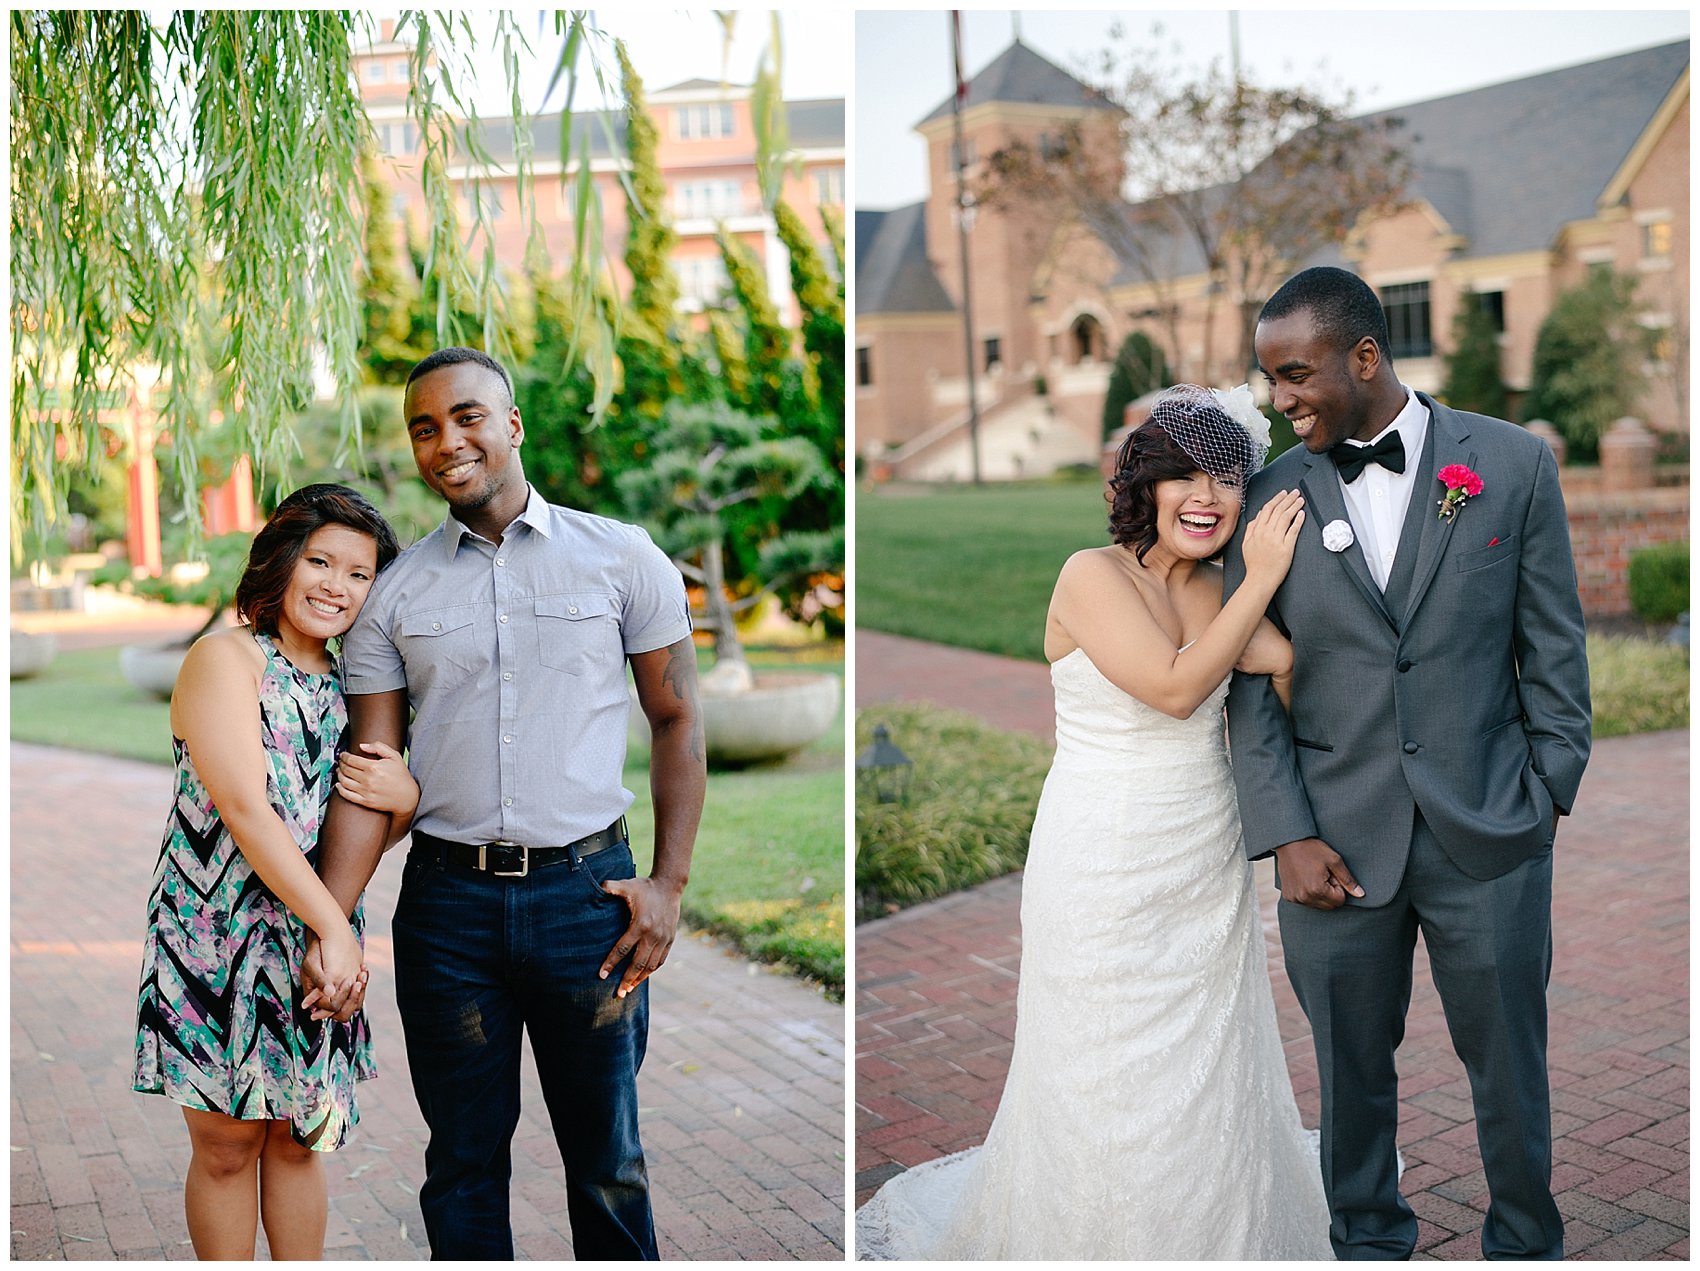 Learning Wedding Day Poses during your Engagement Session Virginia Wedding Photographer